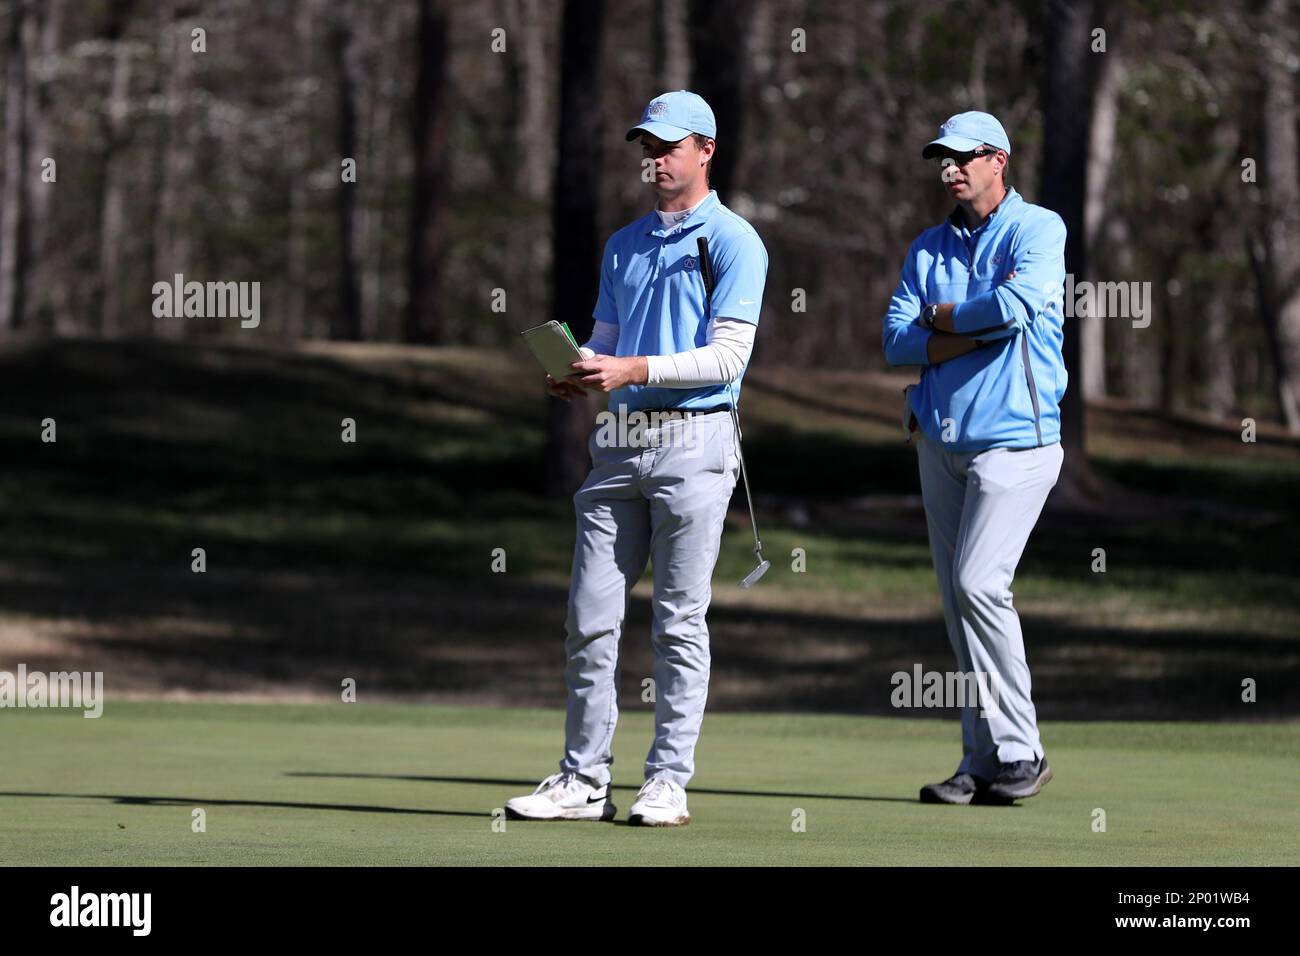 KANNAPOLIS, NC - APRIL 09: North Carolina's Austin Hitt (left) putts on the  12th hole with help from head coach Andrew Sapp (right). The third round of the  Irish Creek Intercollegiate Men's